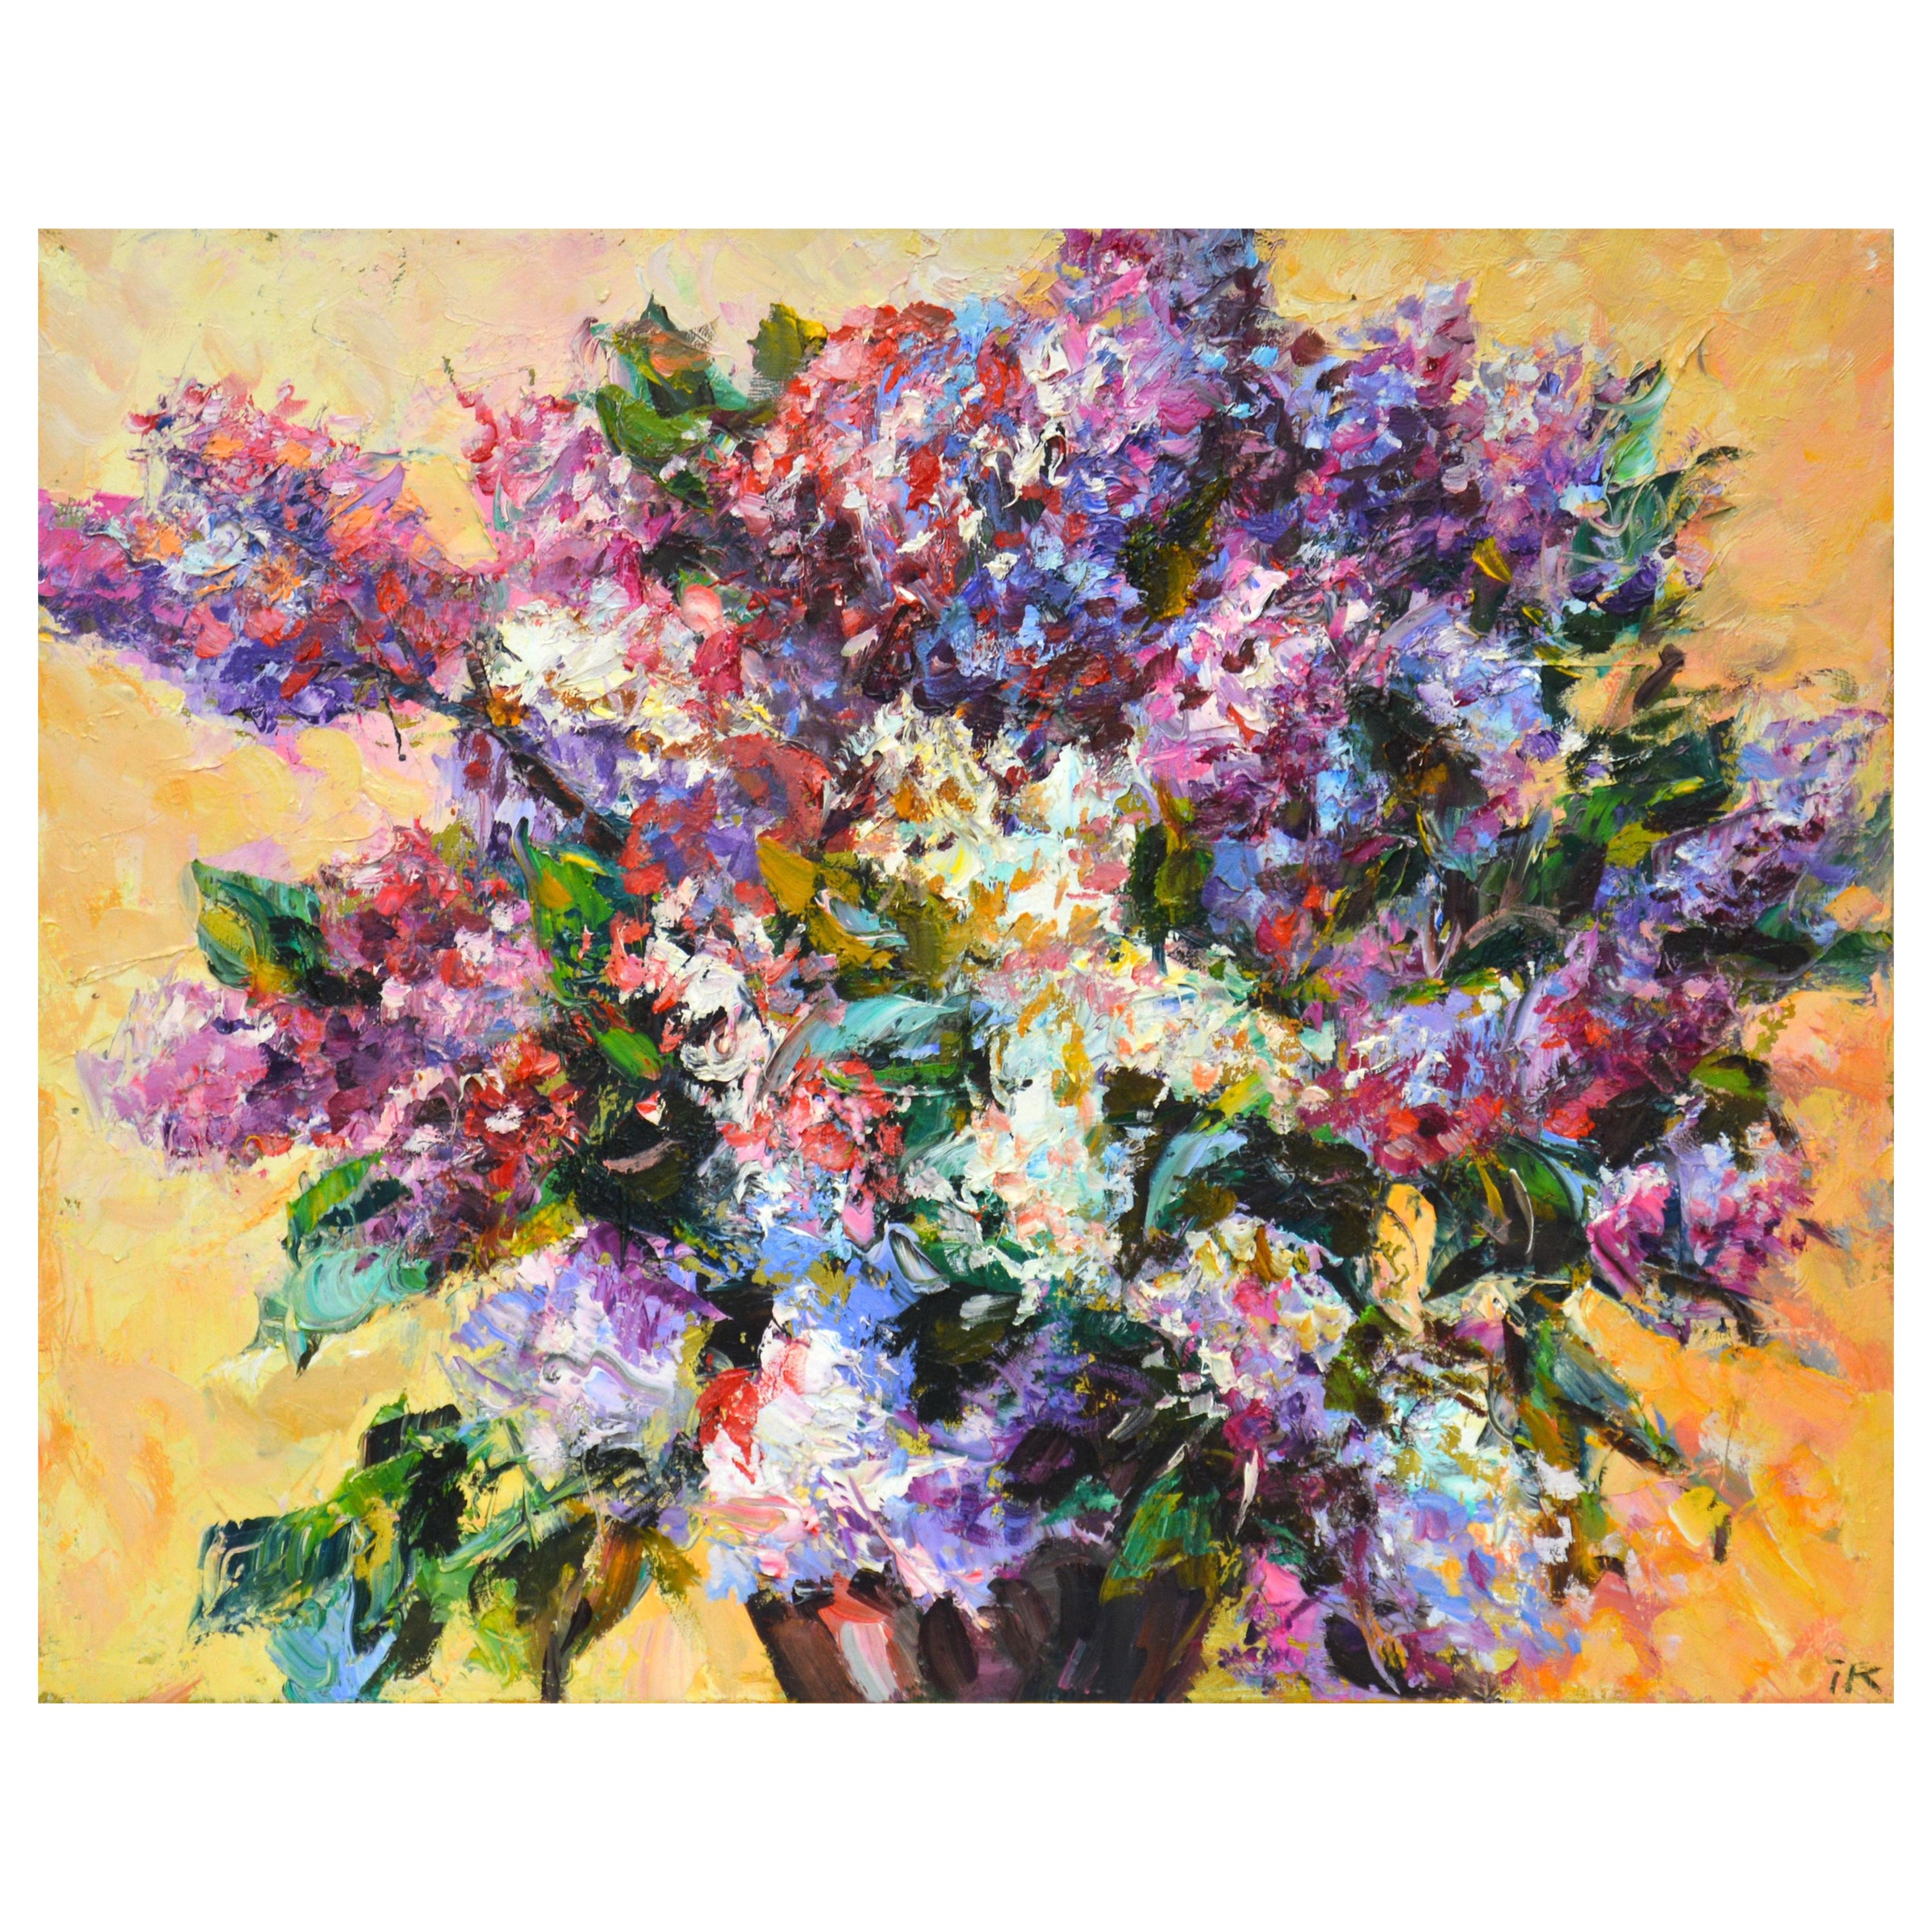 Lilac Impressionist Flowers painting for Interior by Iryna Kastsova Still life